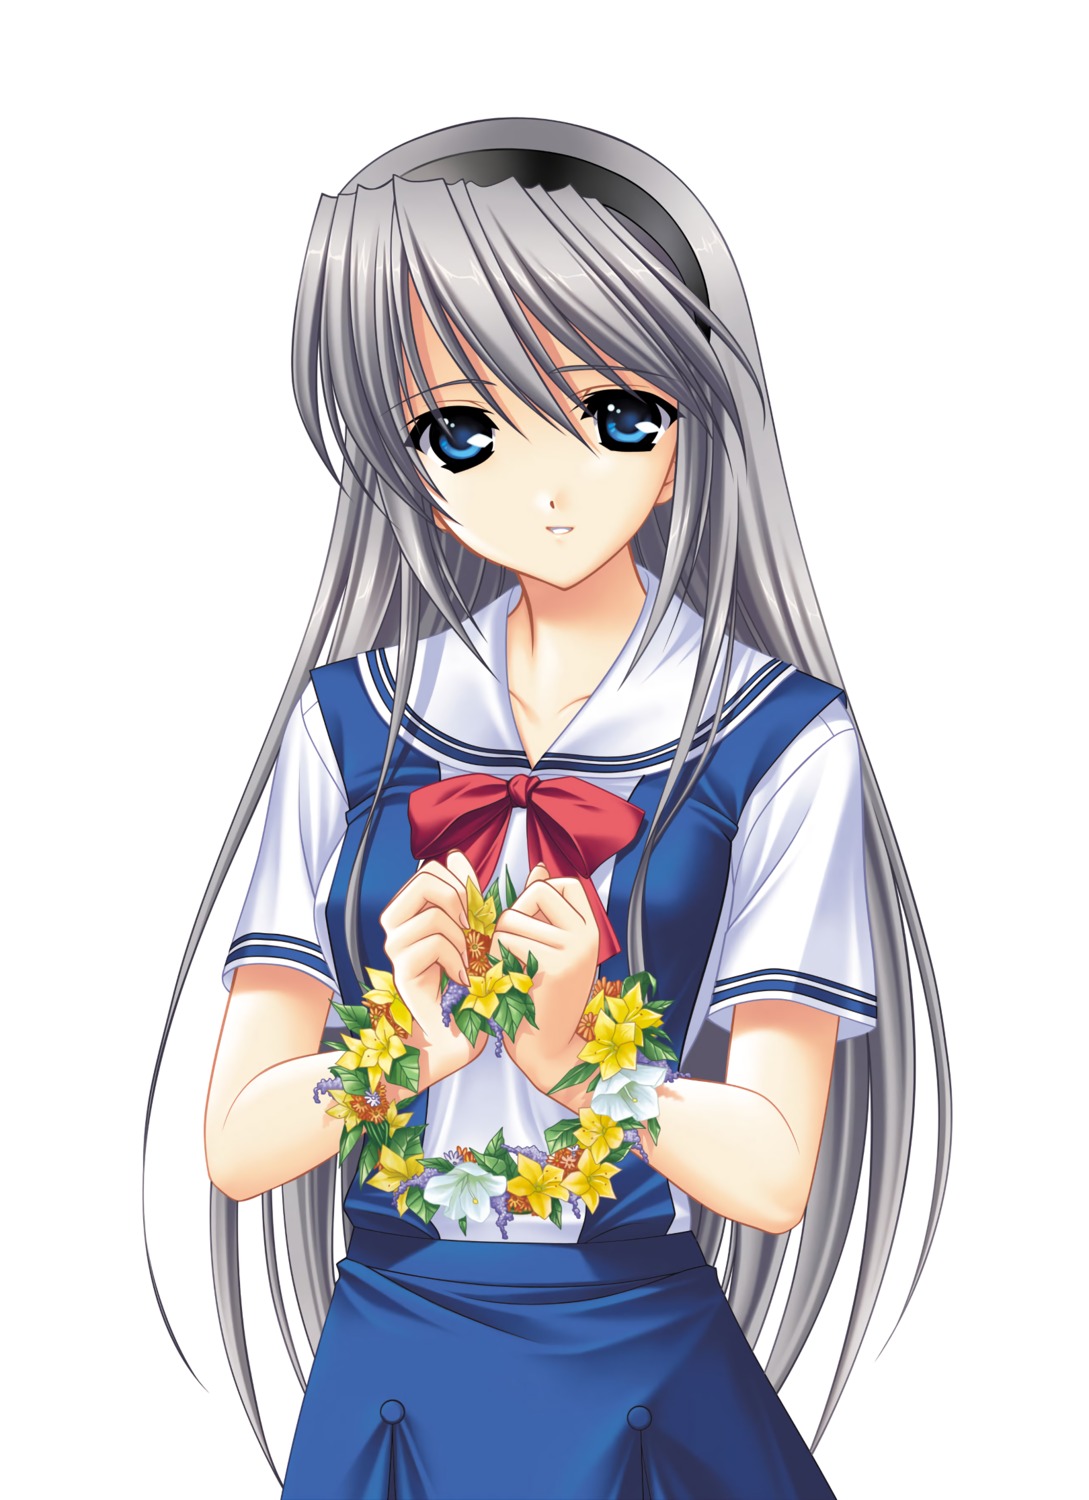 Clannad sequel Tomoyo After: It's a Wonderful Life CS Edition